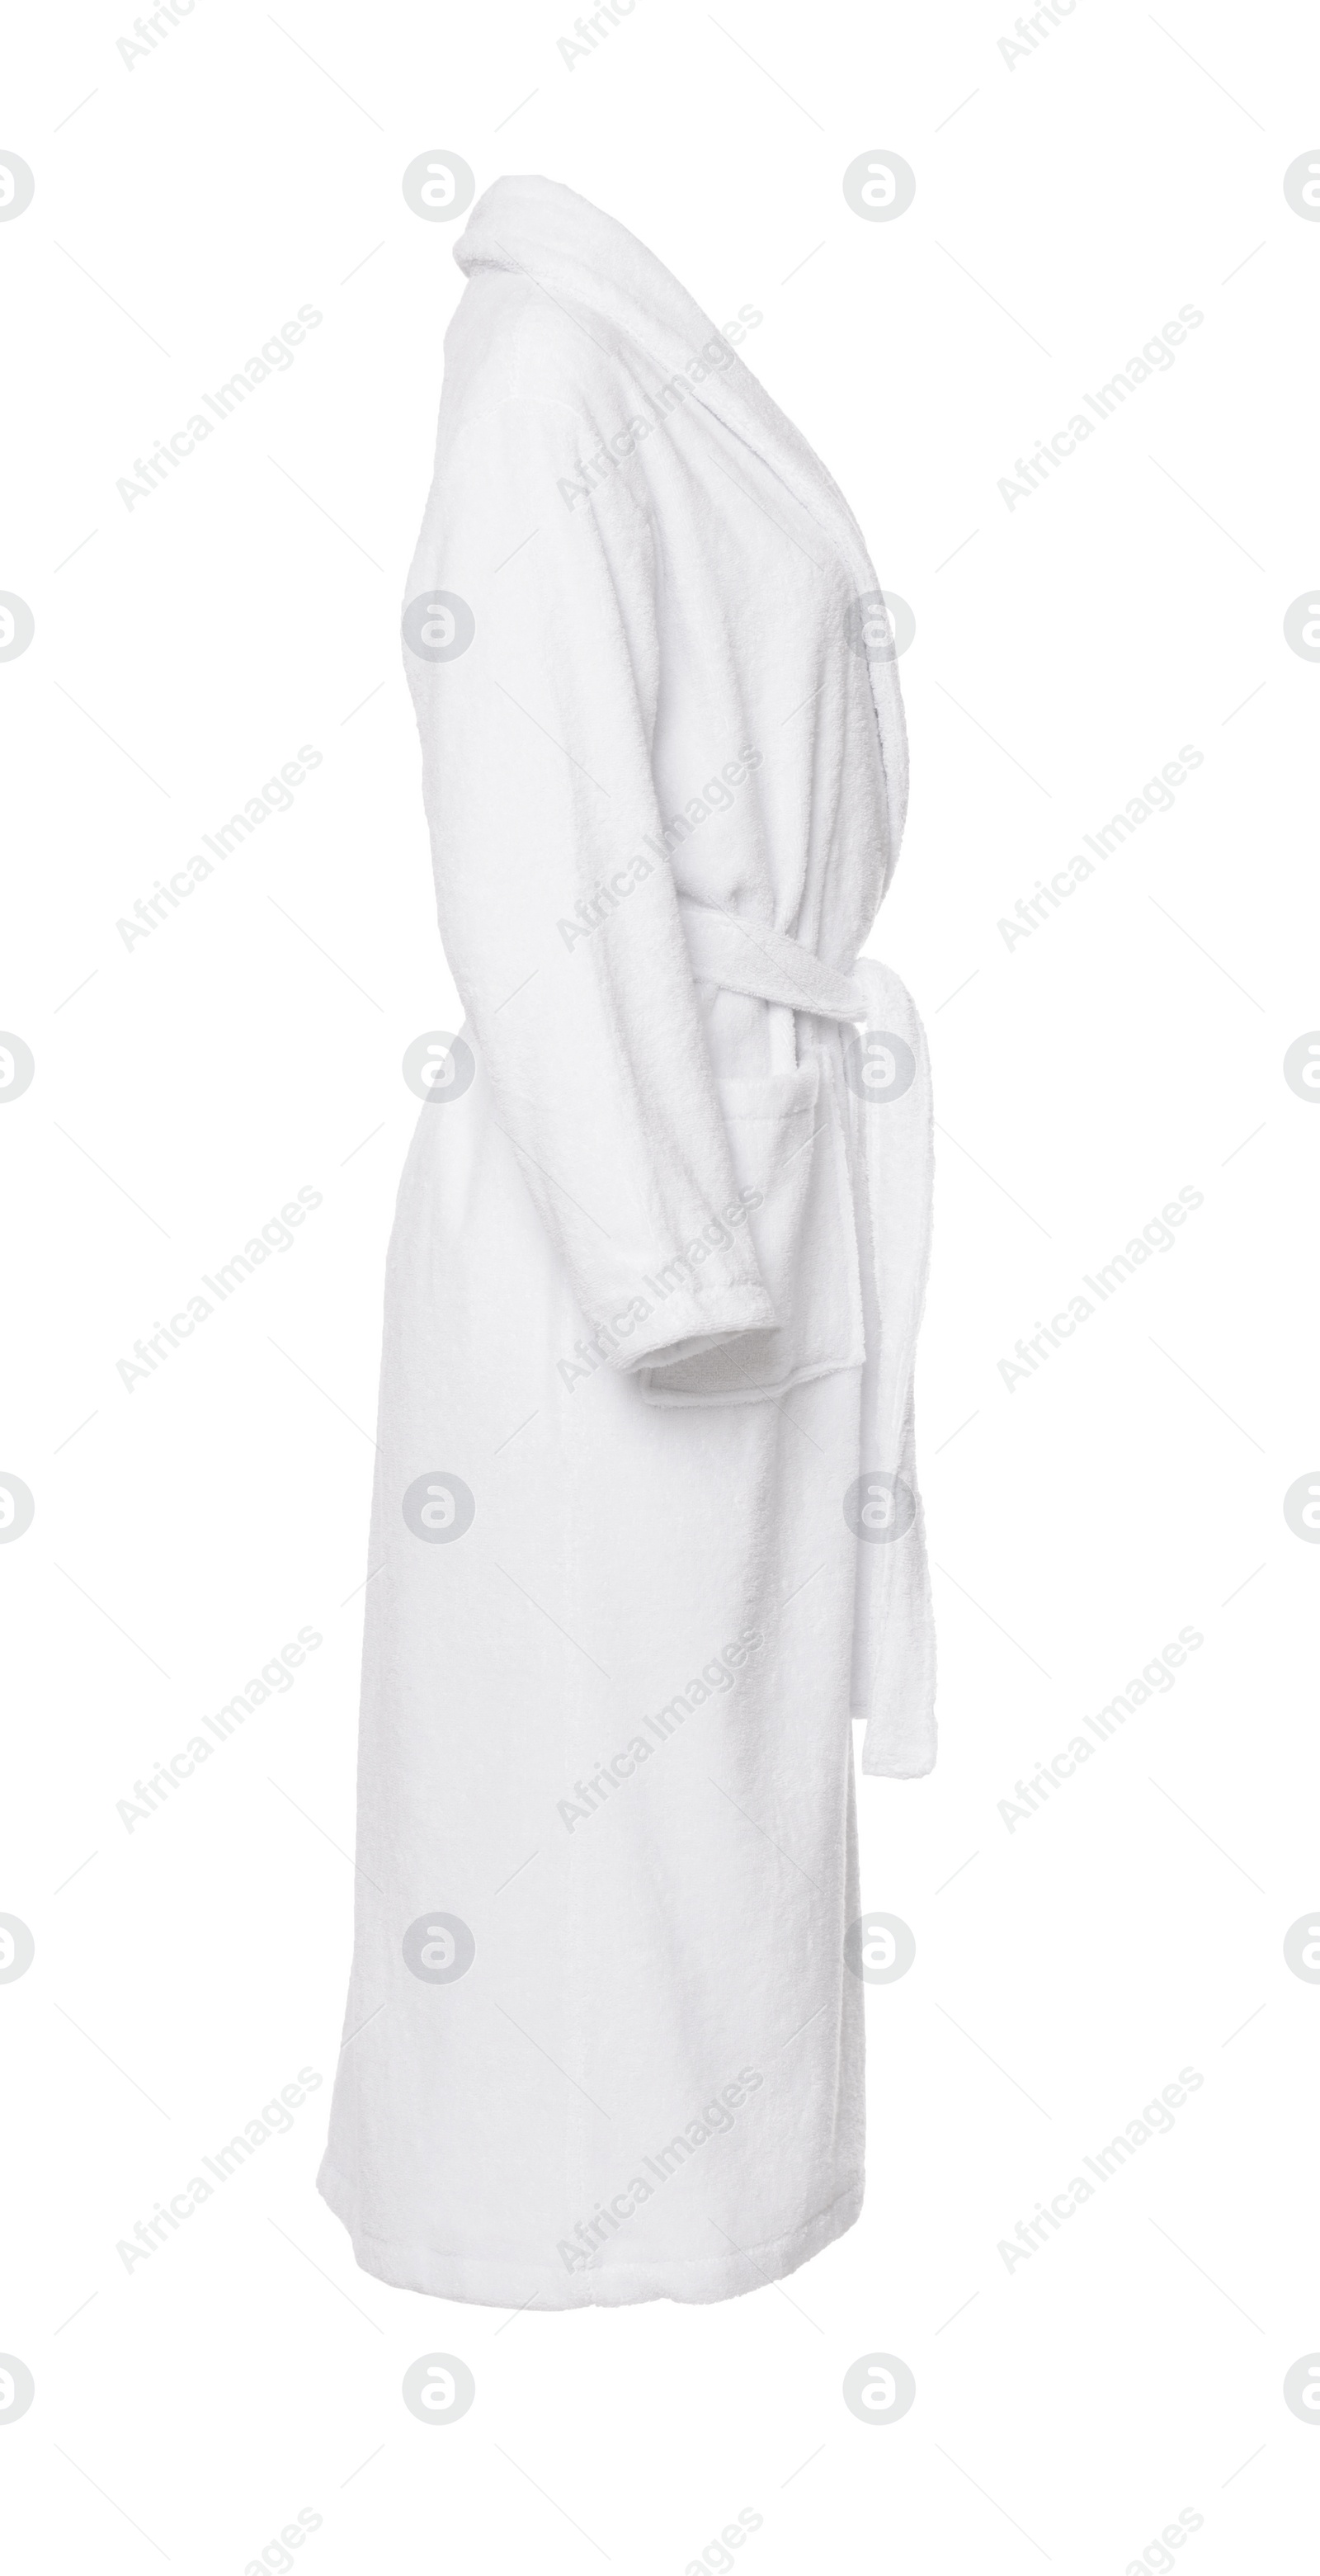 Image of Soft clean terry bathrobe isolated on white, side view